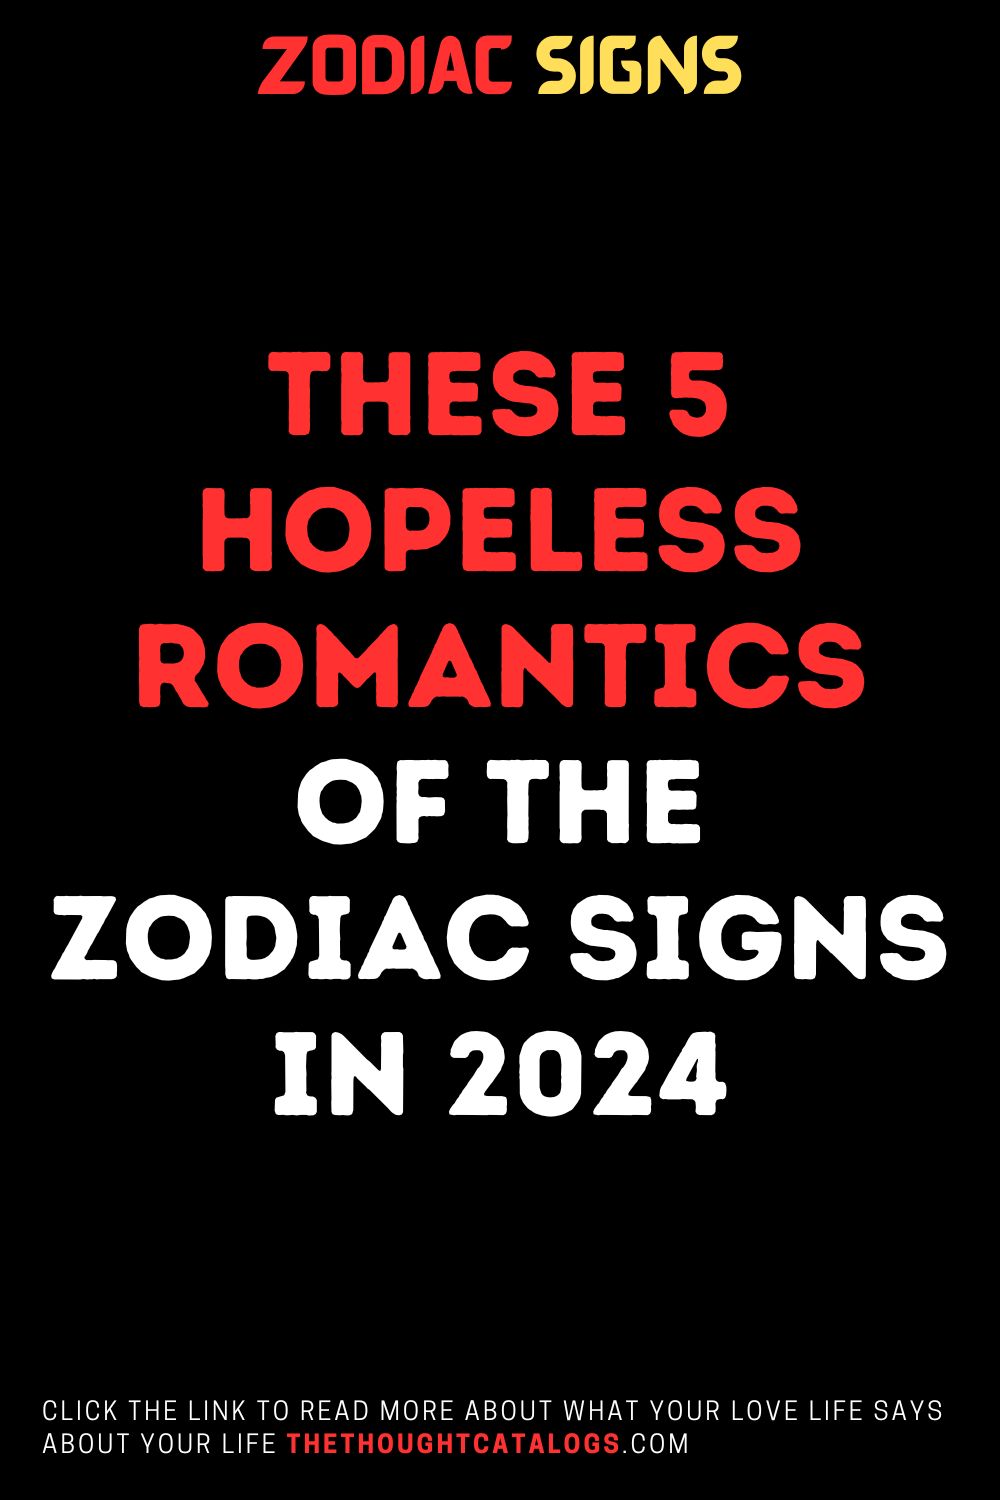 These 5 Hopeless Romantics Of The Zodiac Signs In 2024